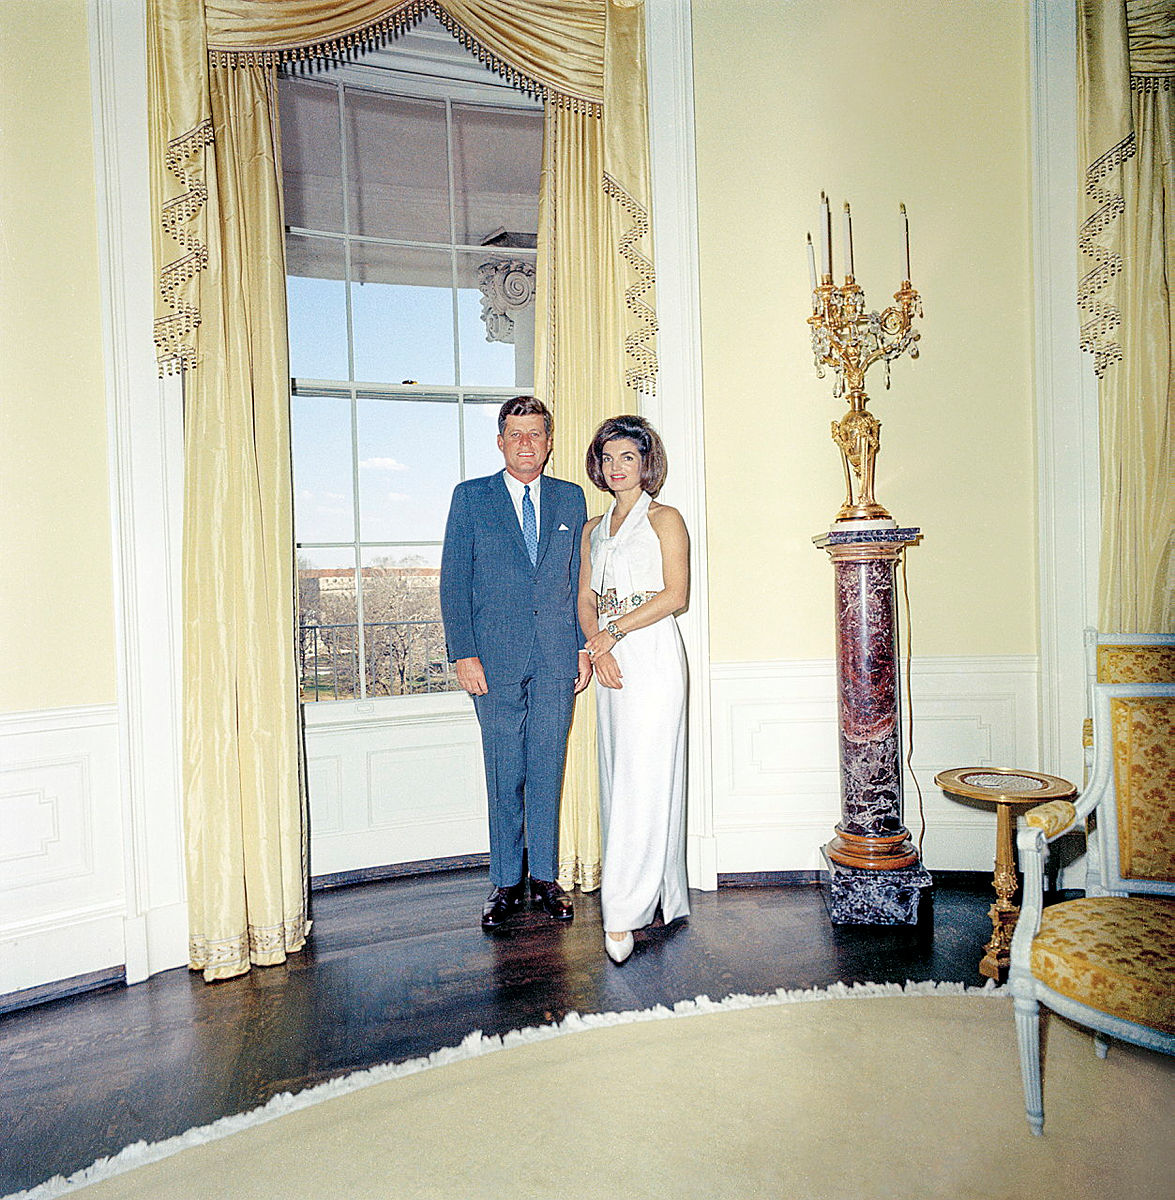 #OTD in 1963, President John F. Kennedy and First Lady Jacqueline Kennedy pose for a portrait in the recently redesigned Yellow Oval Room in the White House. 📷: @JFKLibrary